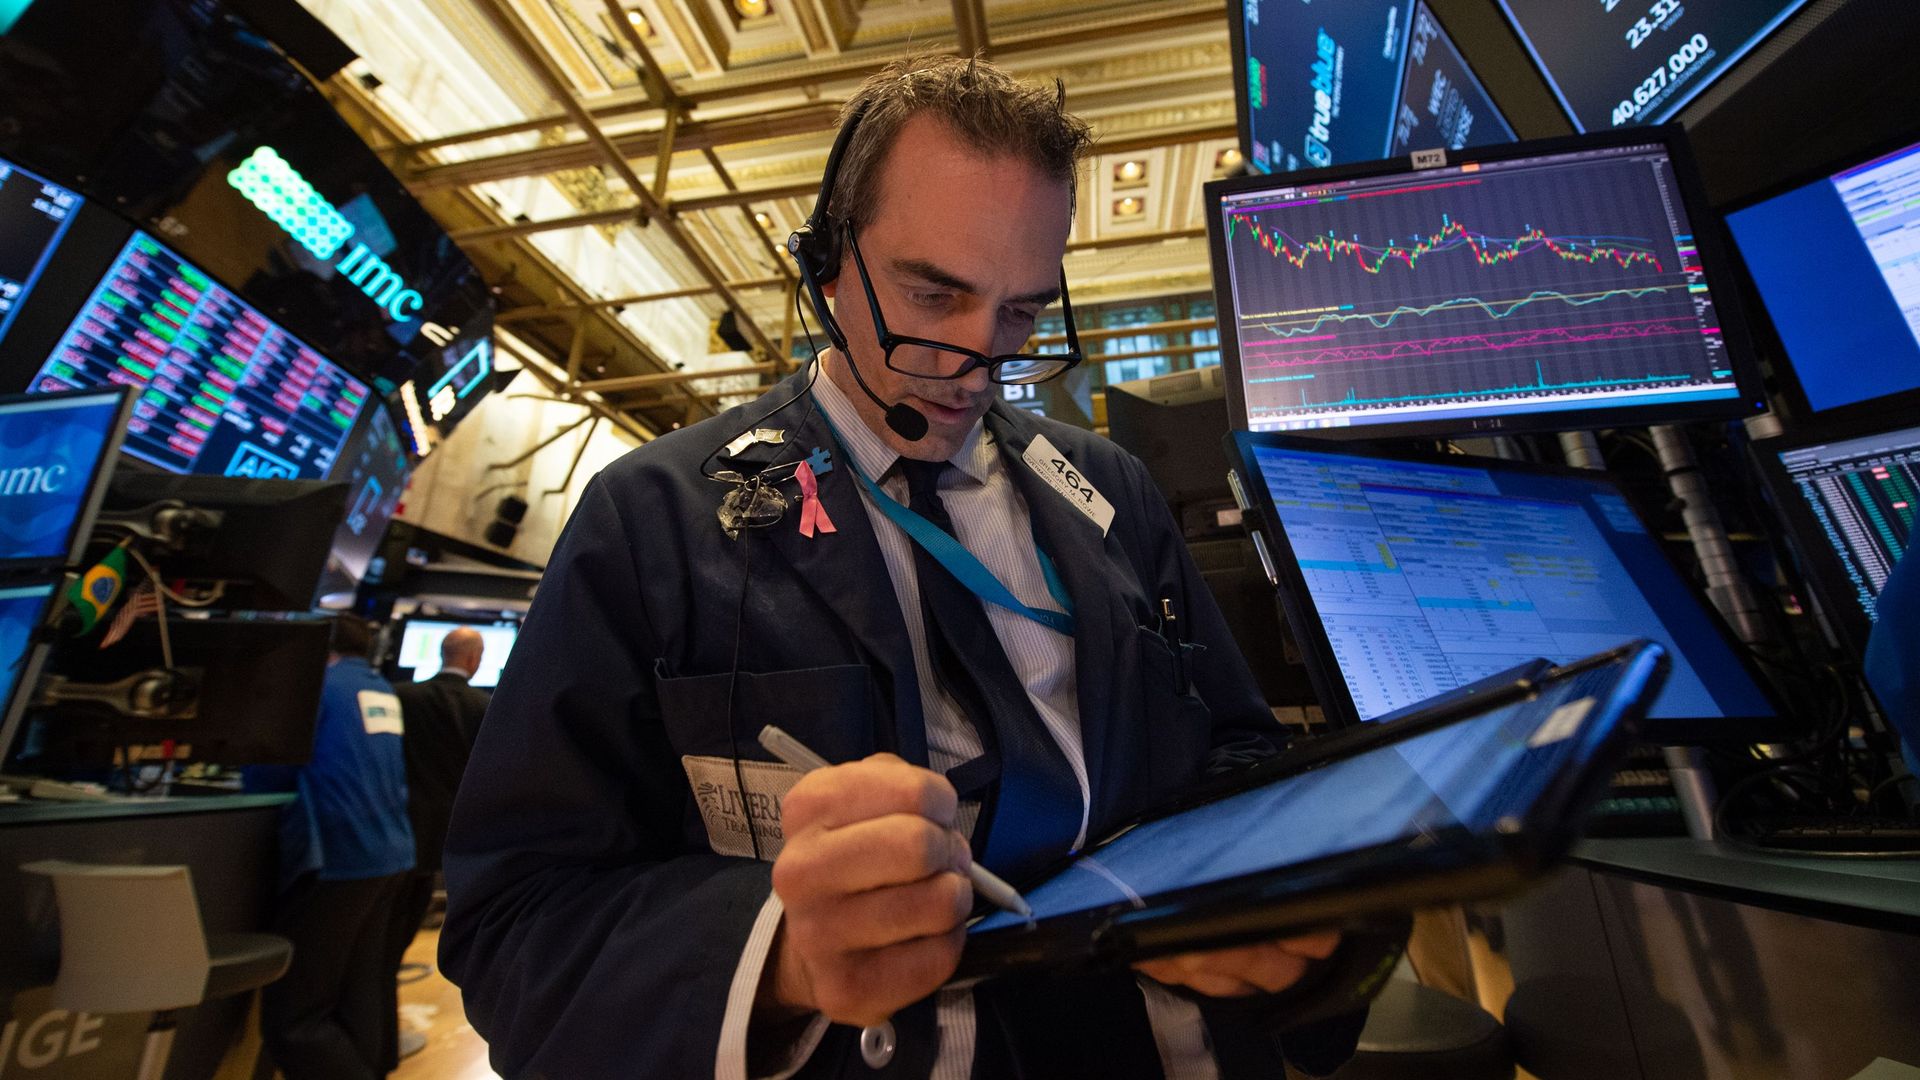 Trader on the floor of the new york stock exchange